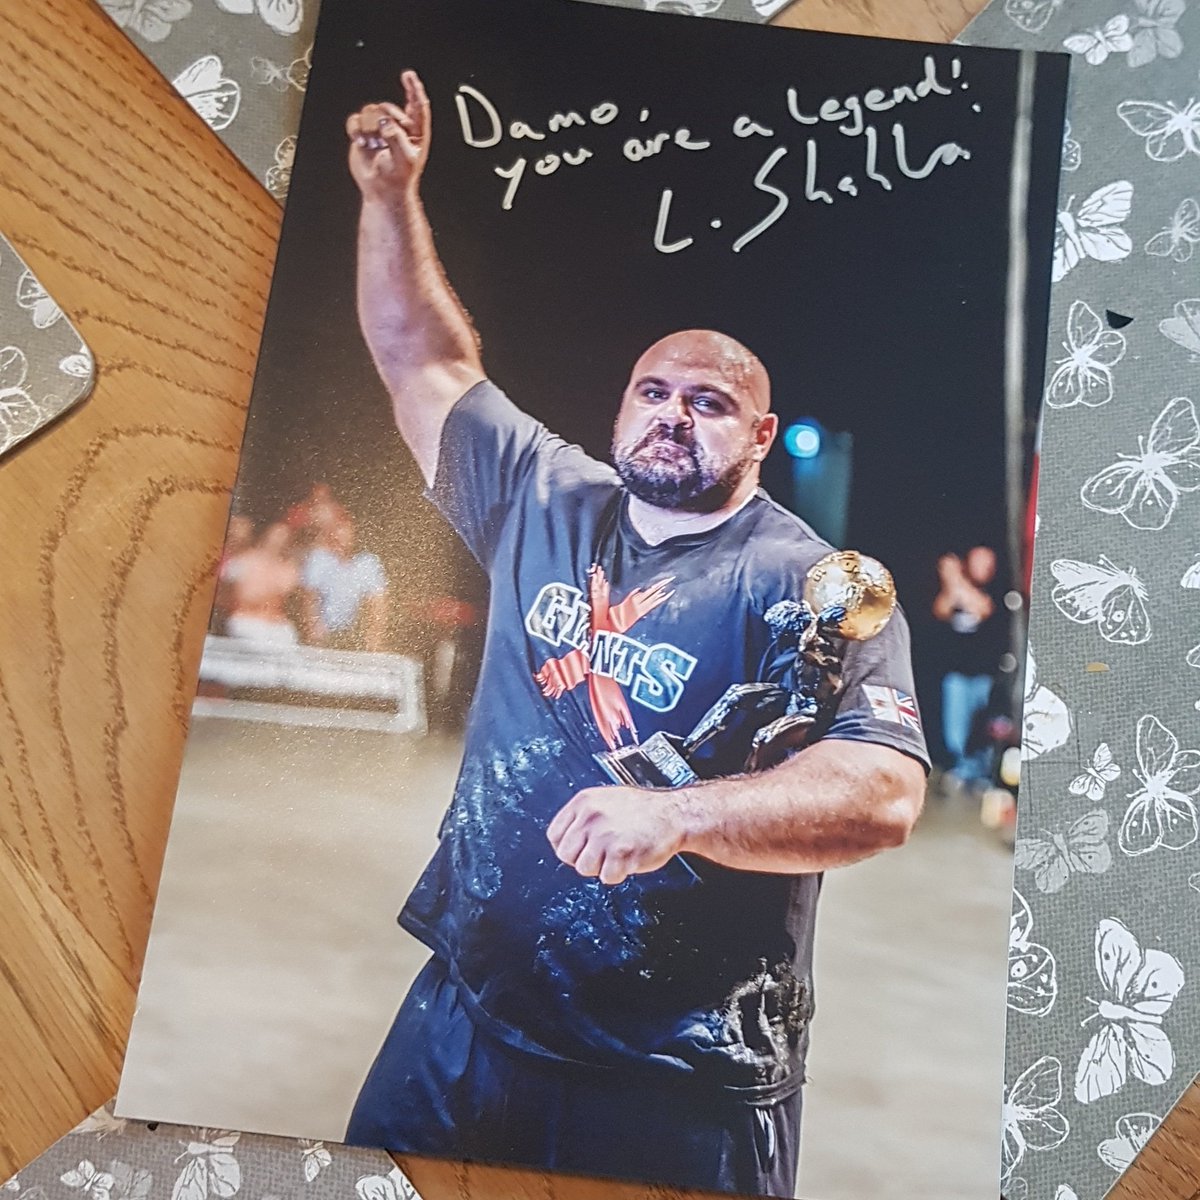 My signed #photo from @biglozstrongman I am proud to say motiv8-shakers.com t/a Personalise-it are proud to be an #officialsupplier for some of his merchandise! Check out his range at laurenceshahlaei.co.uk 
#merchandise #strongman #wsm #europesstrongestman #giantslive